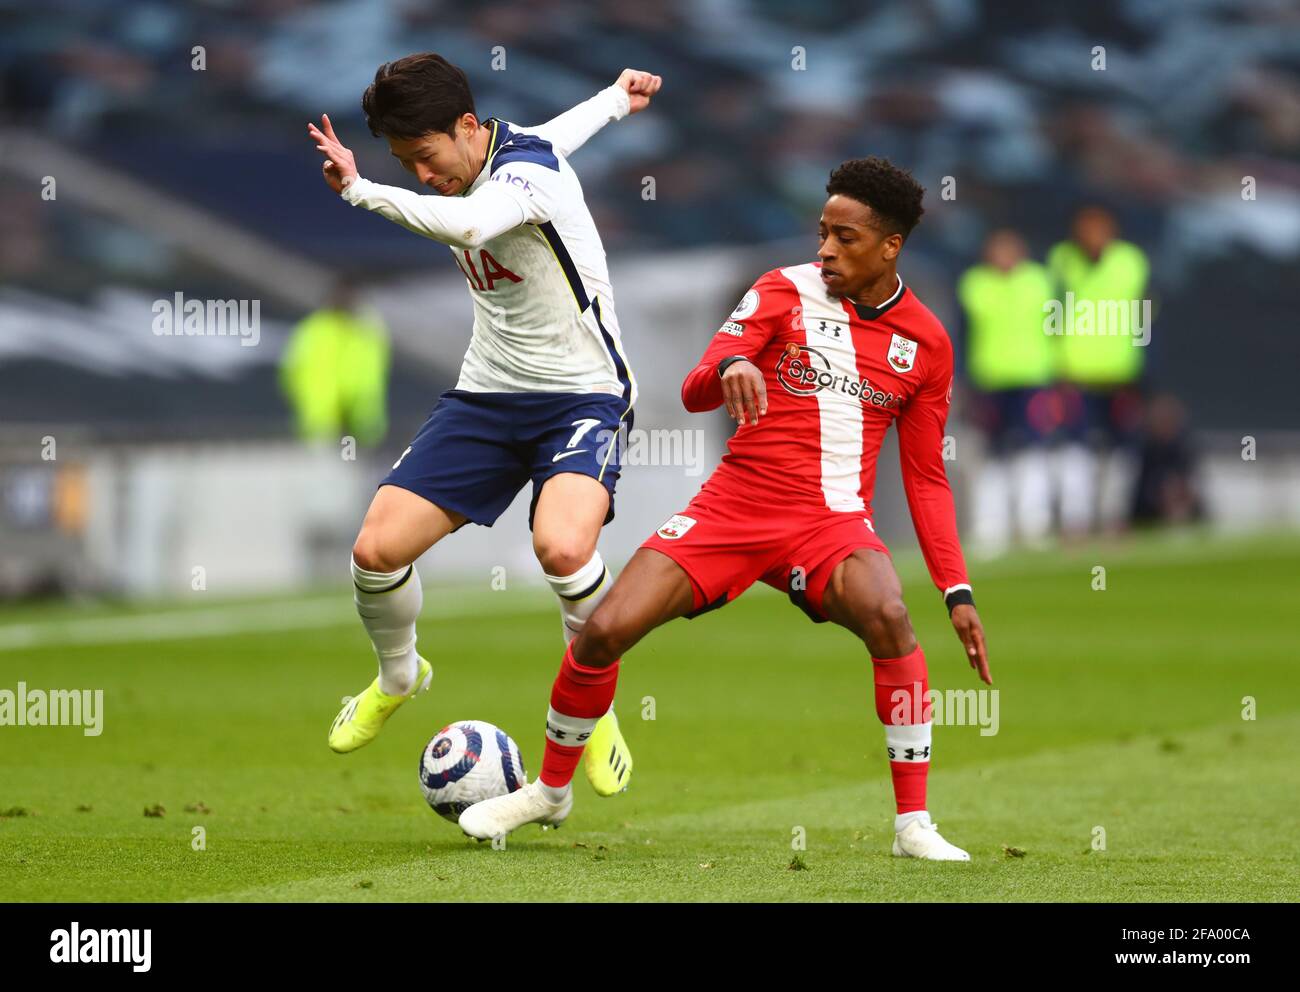 Tottenham Hotspur's Son Heung-min (left) and Southampton's Kyle Walker-Peters (right) battle for the ball during the Premier League match at the Tottenham Hotspur Stadium, London. Picture date: Wednesday April 21, 2021. Stock Photo